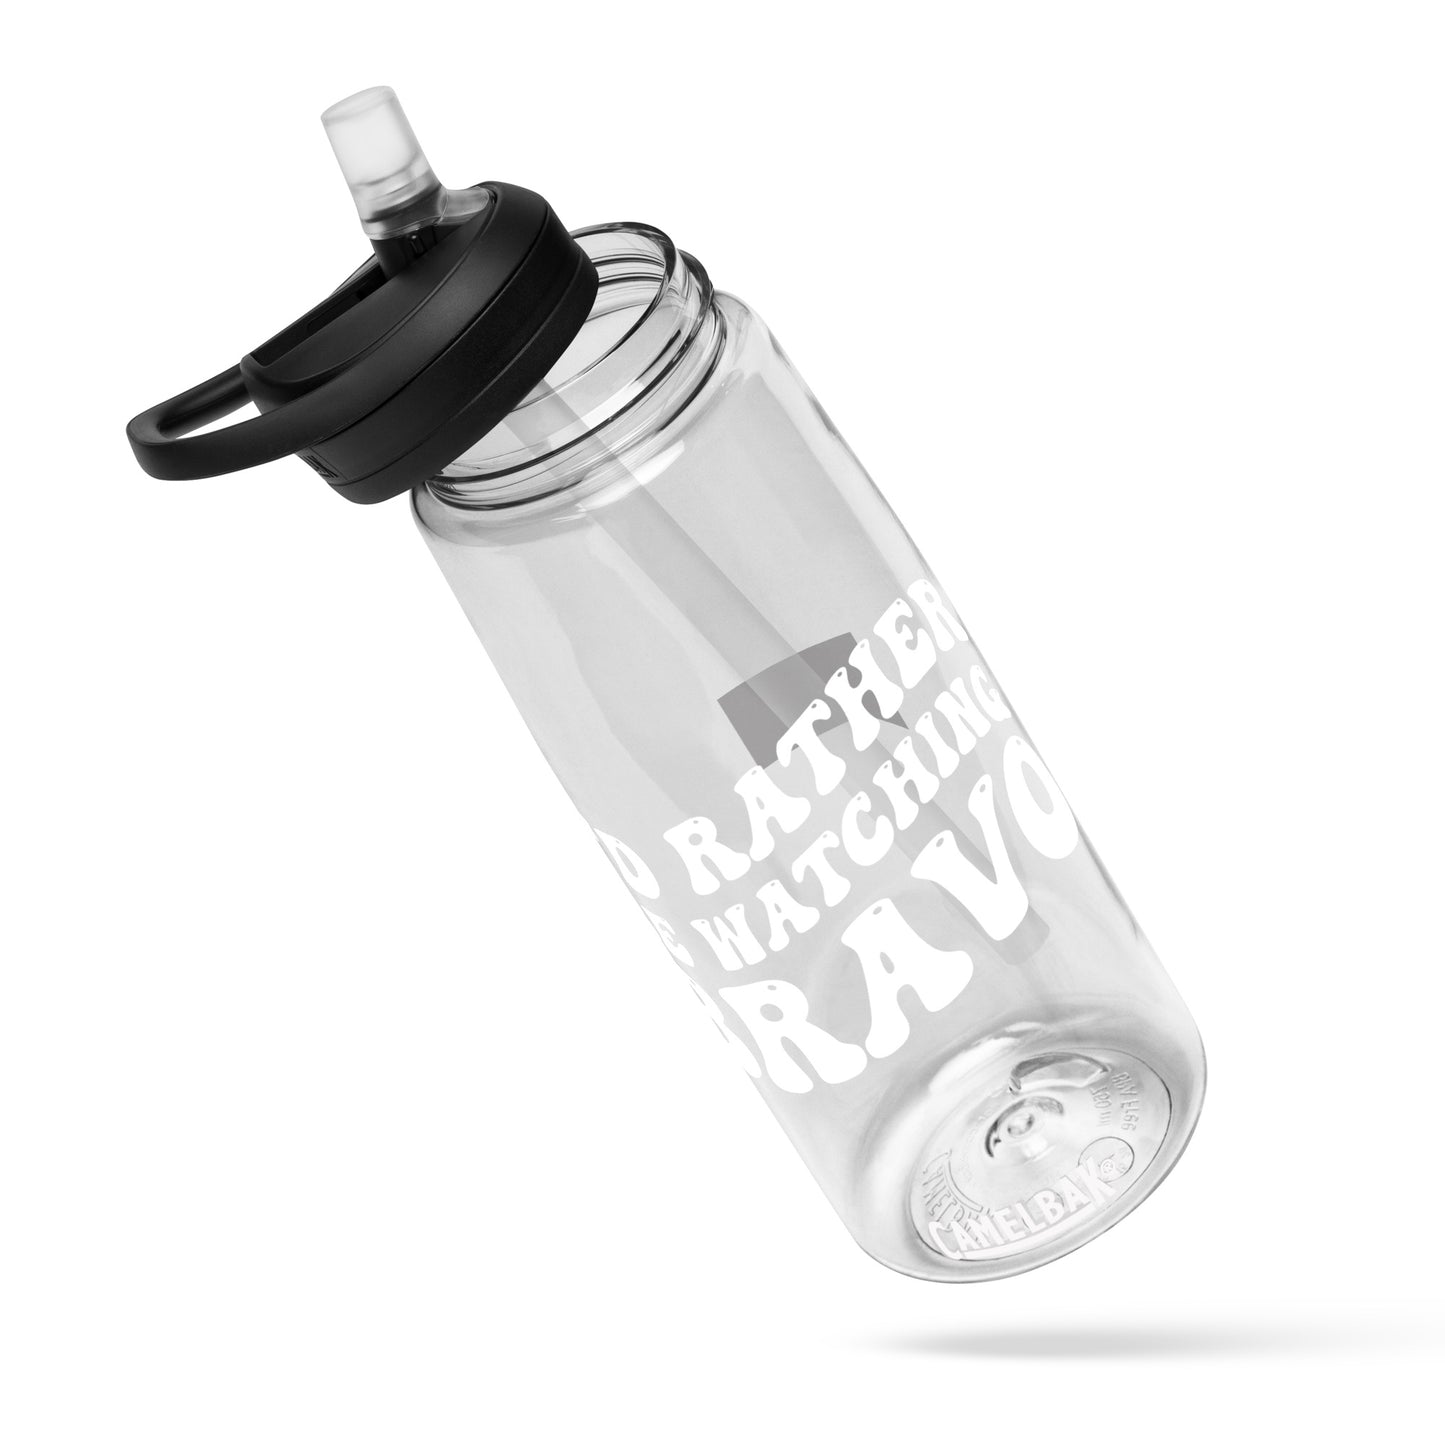 I'd Rather Be Watching Bravo Camelbak Eddy®+ Water Bottle